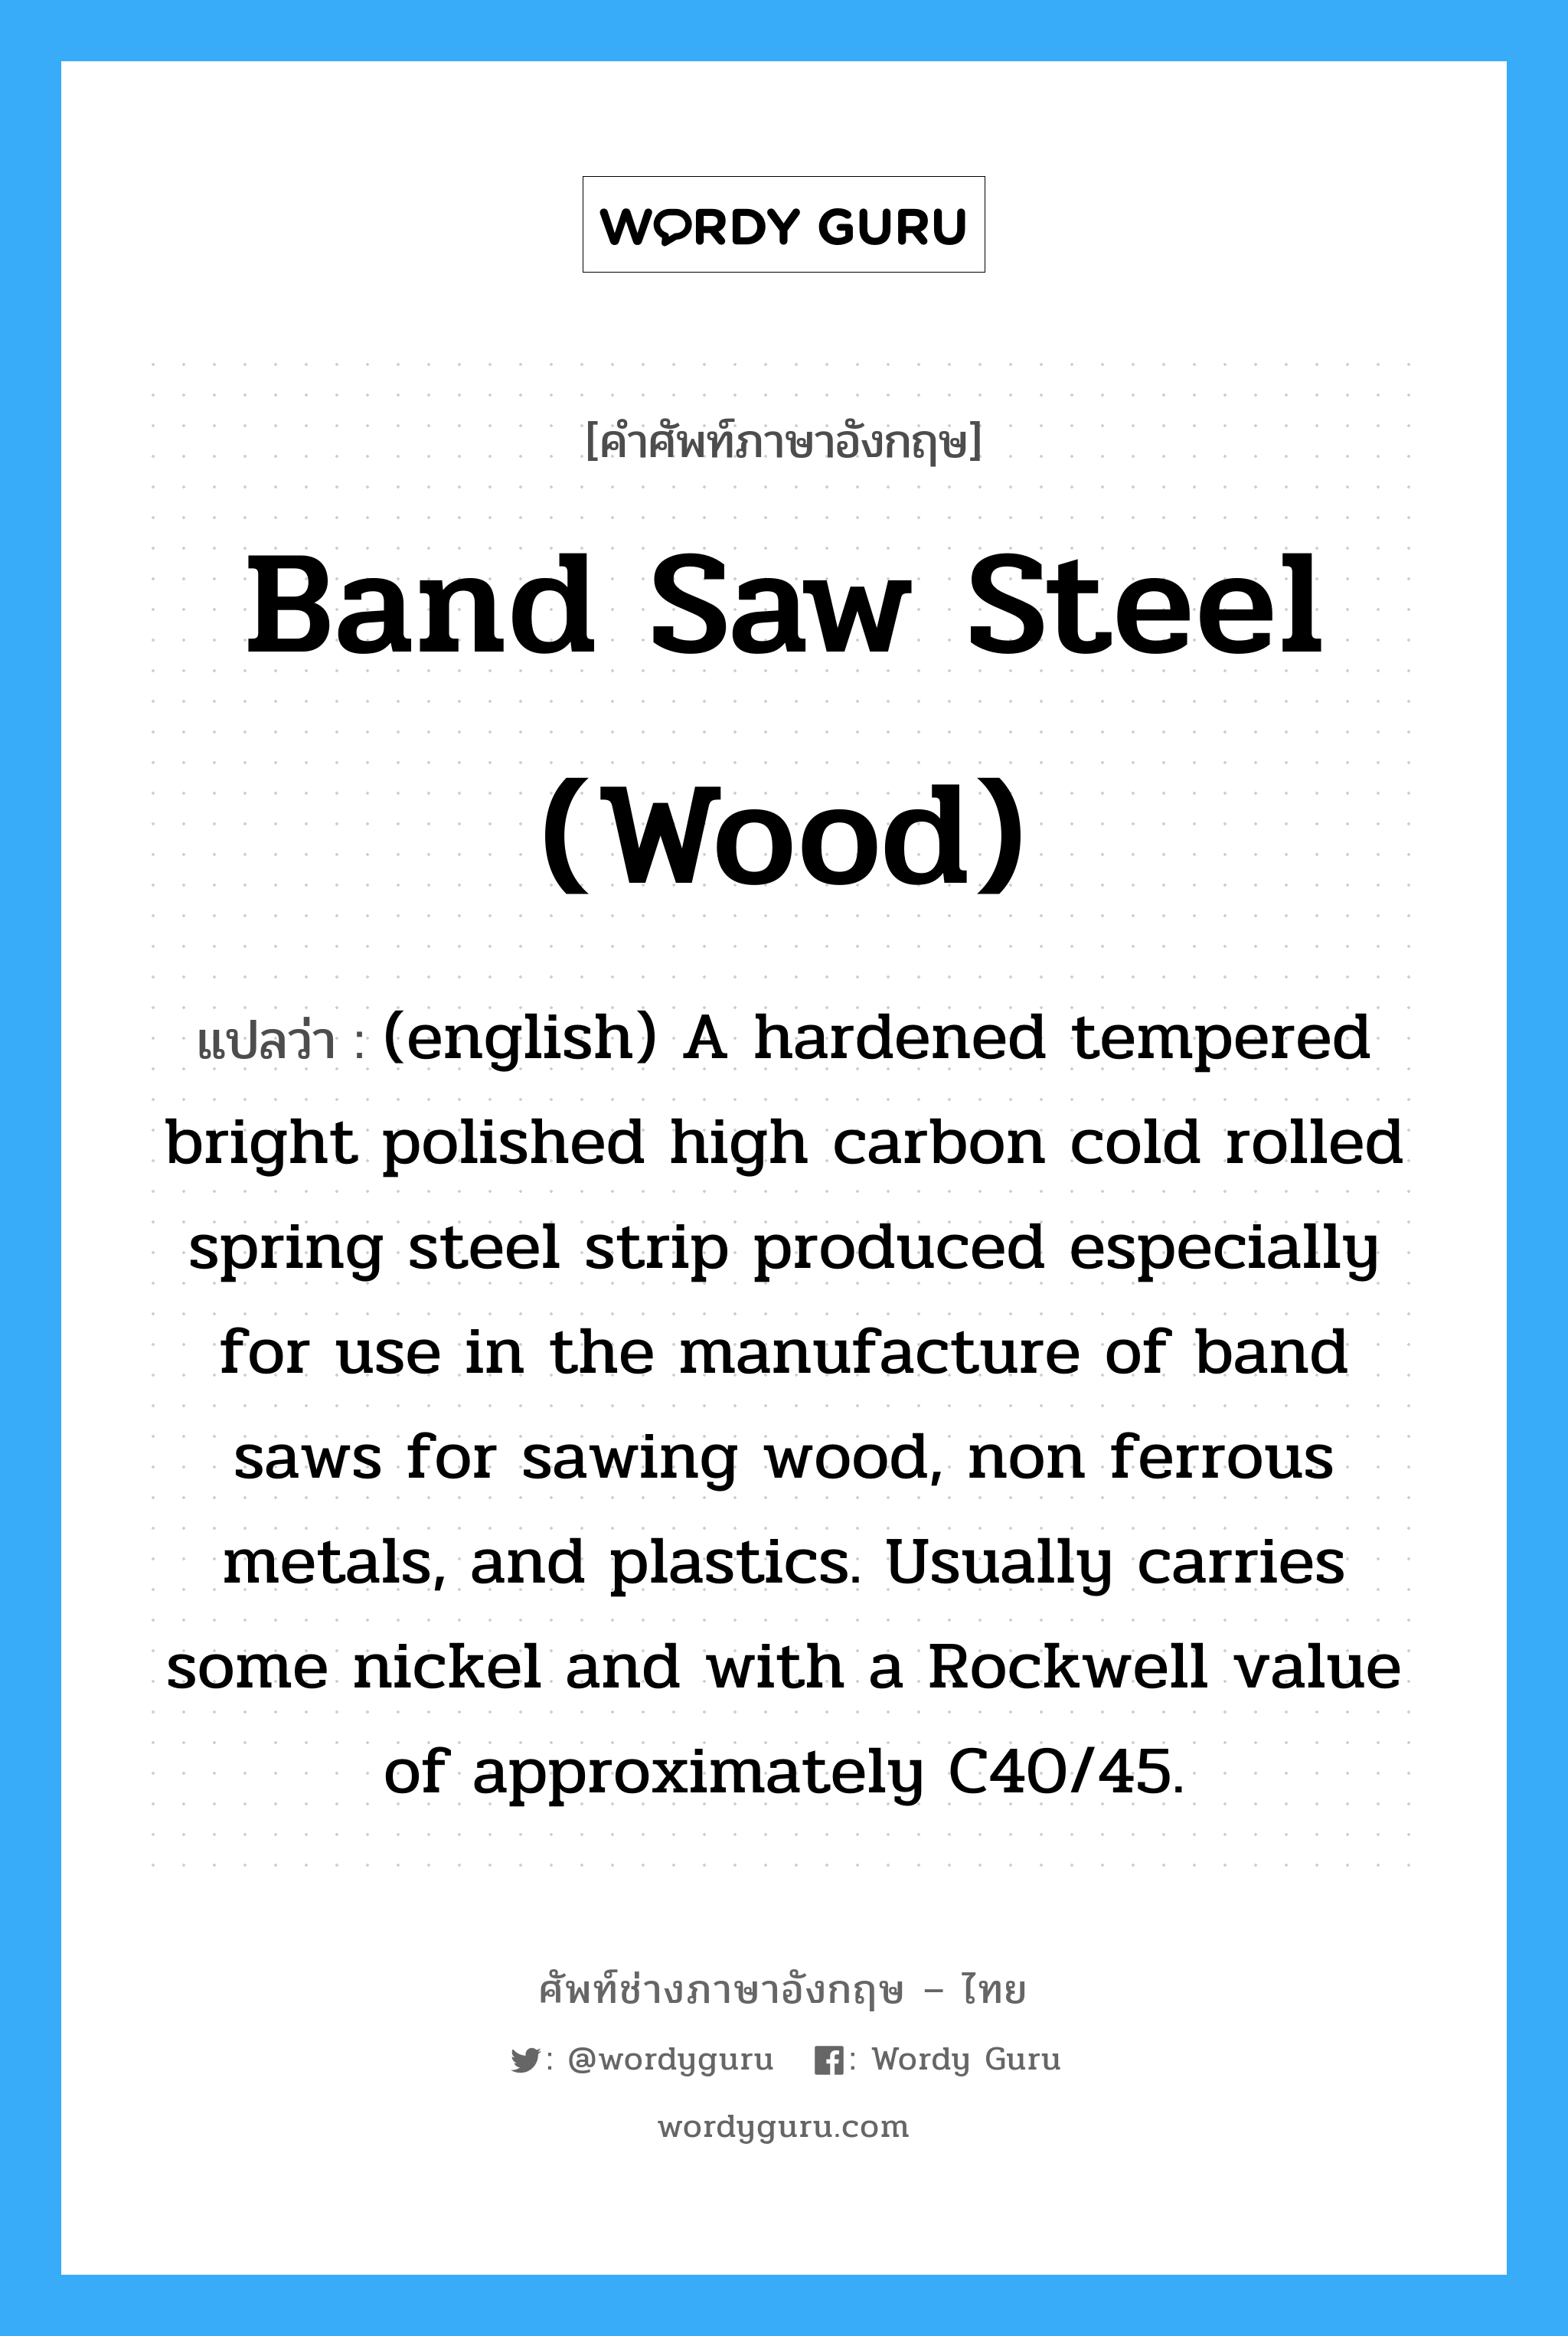 (english) A hardened tempered bright polished high carbon cold rolled spring steel strip produced especially for use in the manufacture of band saws for sawing wood, non ferrous metals, and plastics. Usually carries some nickel and with a Rockwell value of approximately C40/45. ภาษาอังกฤษ?, คำศัพท์ช่างภาษาอังกฤษ - ไทย (english) A hardened tempered bright polished high carbon cold rolled spring steel strip produced especially for use in the manufacture of band saws for sawing wood, non ferrous metals, and plastics. Usually carries some nickel and with a Rockwell value of approximately C40/45. คำศัพท์ภาษาอังกฤษ (english) A hardened tempered bright polished high carbon cold rolled spring steel strip produced especially for use in the manufacture of band saws for sawing wood, non ferrous metals, and plastics. Usually carries some nickel and with a Rockwell value of approximately C40/45. แปลว่า Band Saw Steel (Wood)